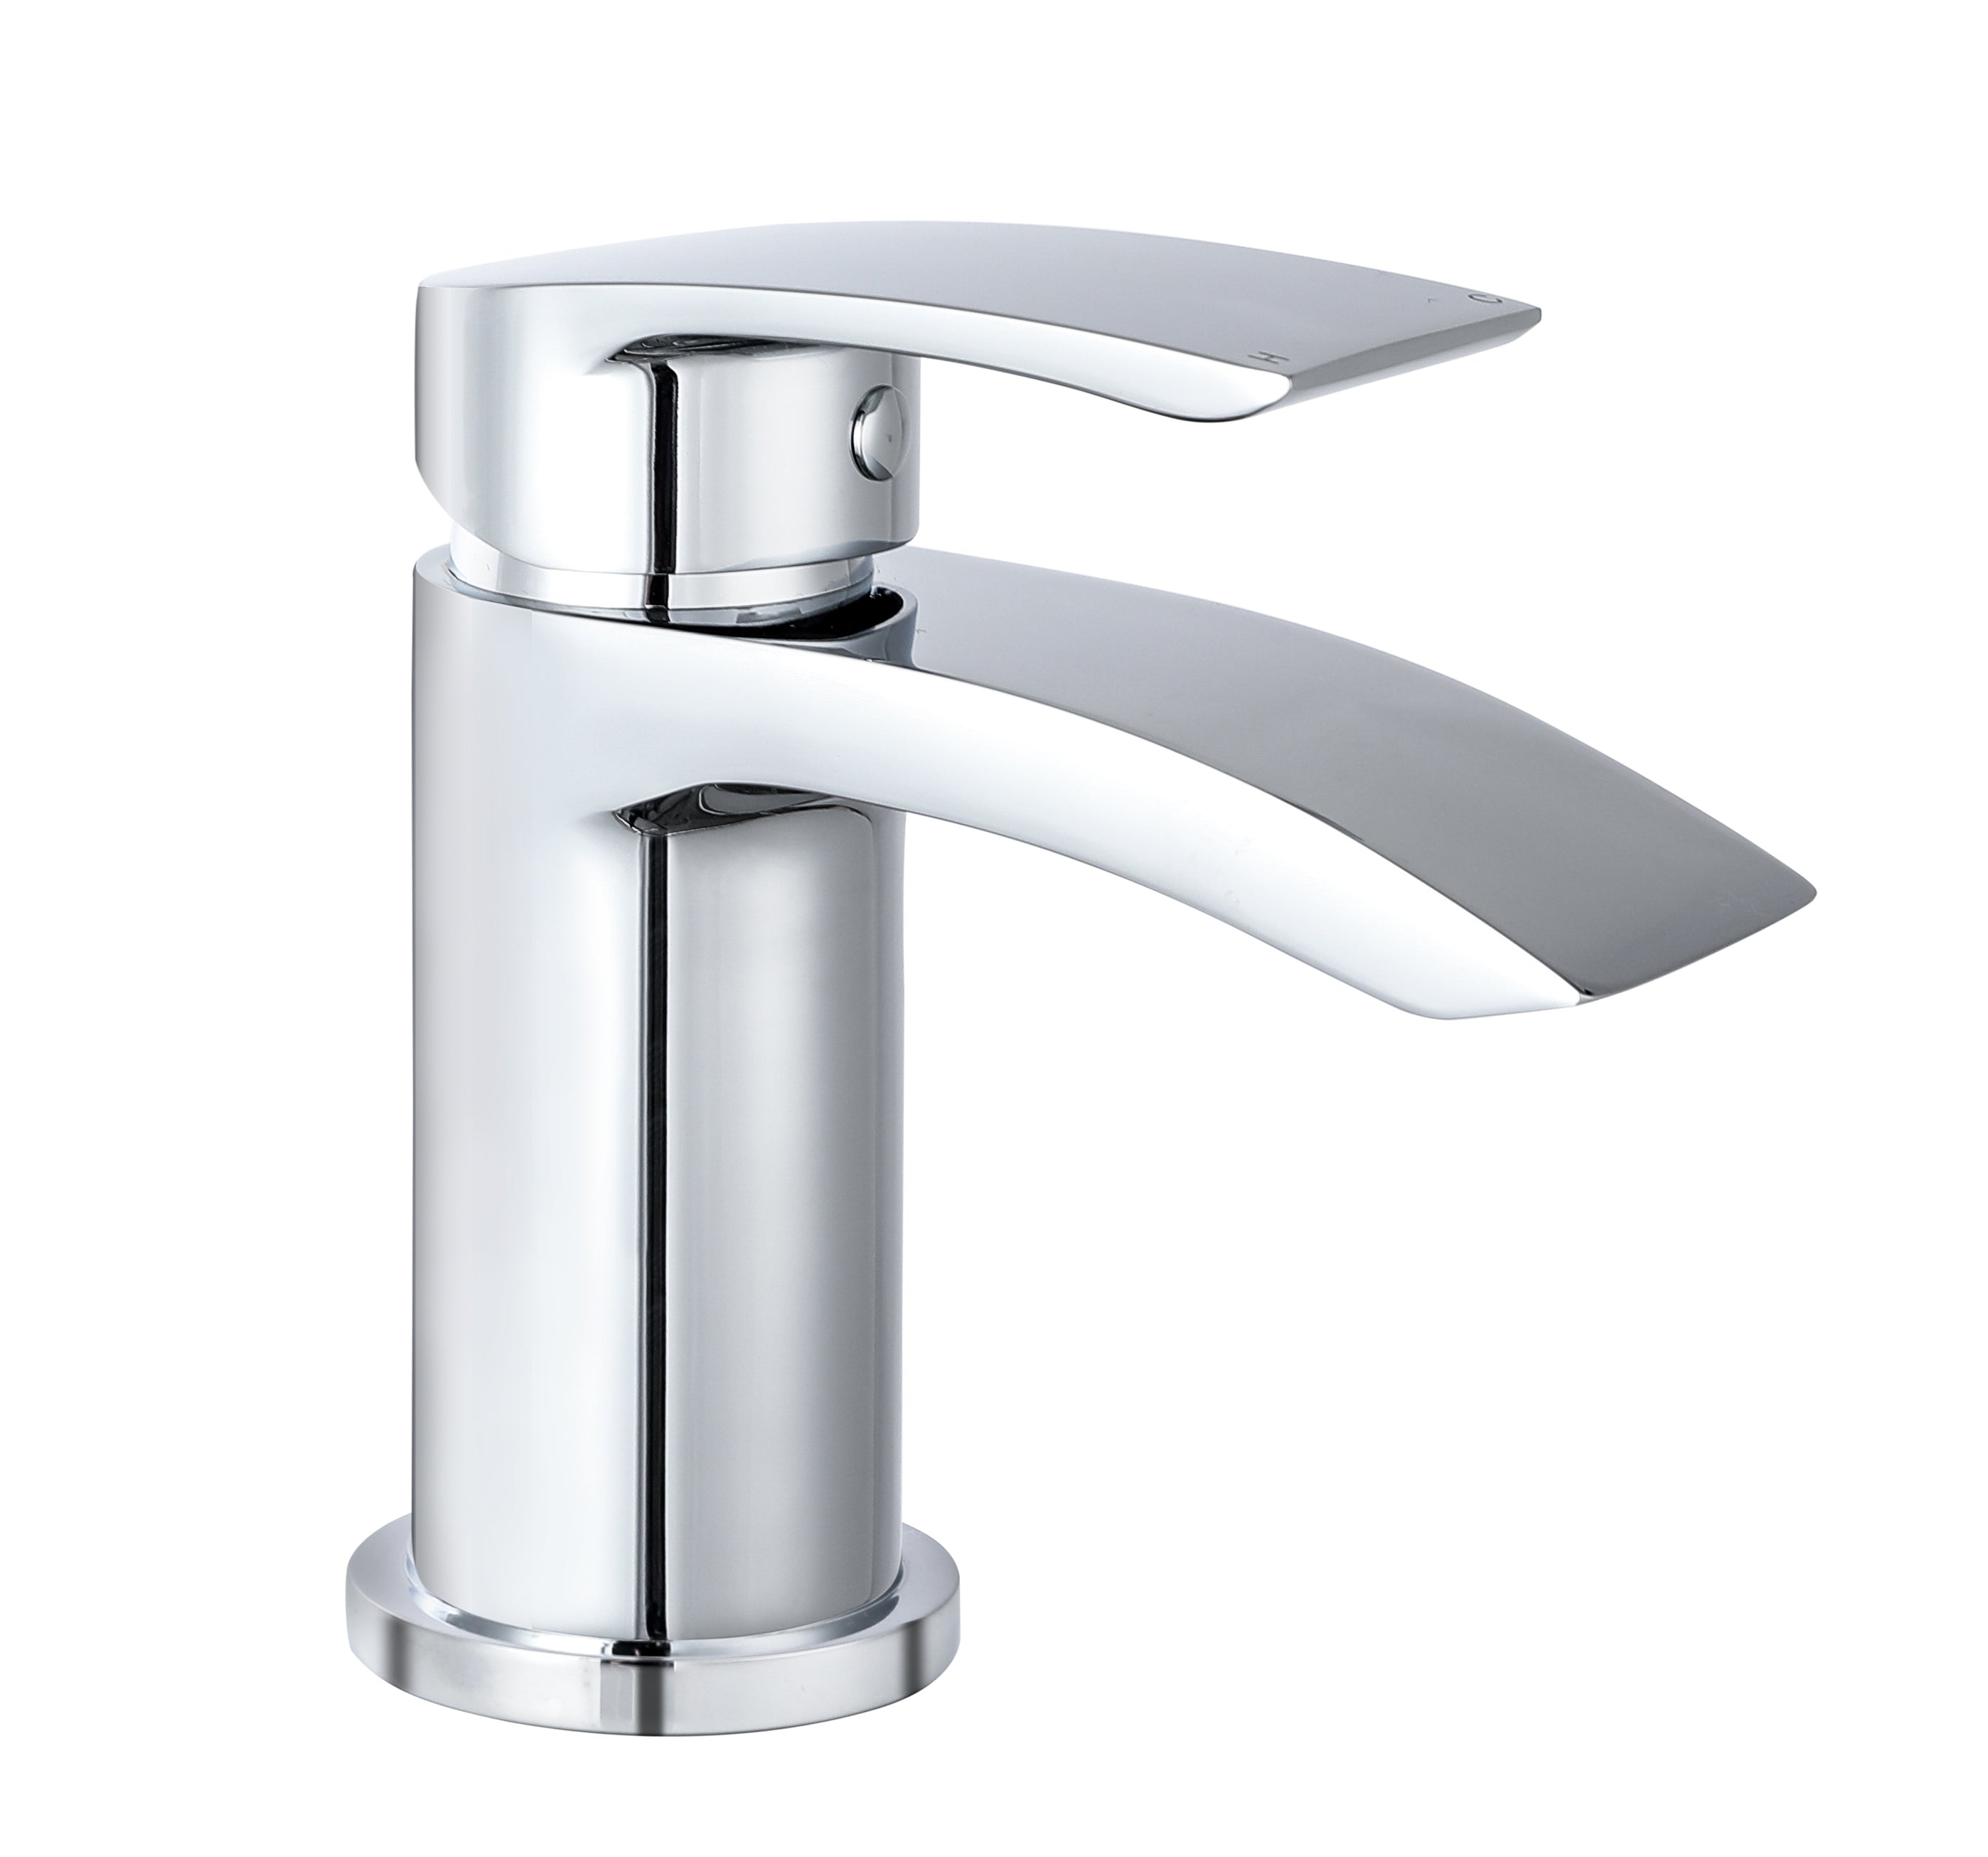 Carter Mono Basin Mixer Tap with Waste - Chrome